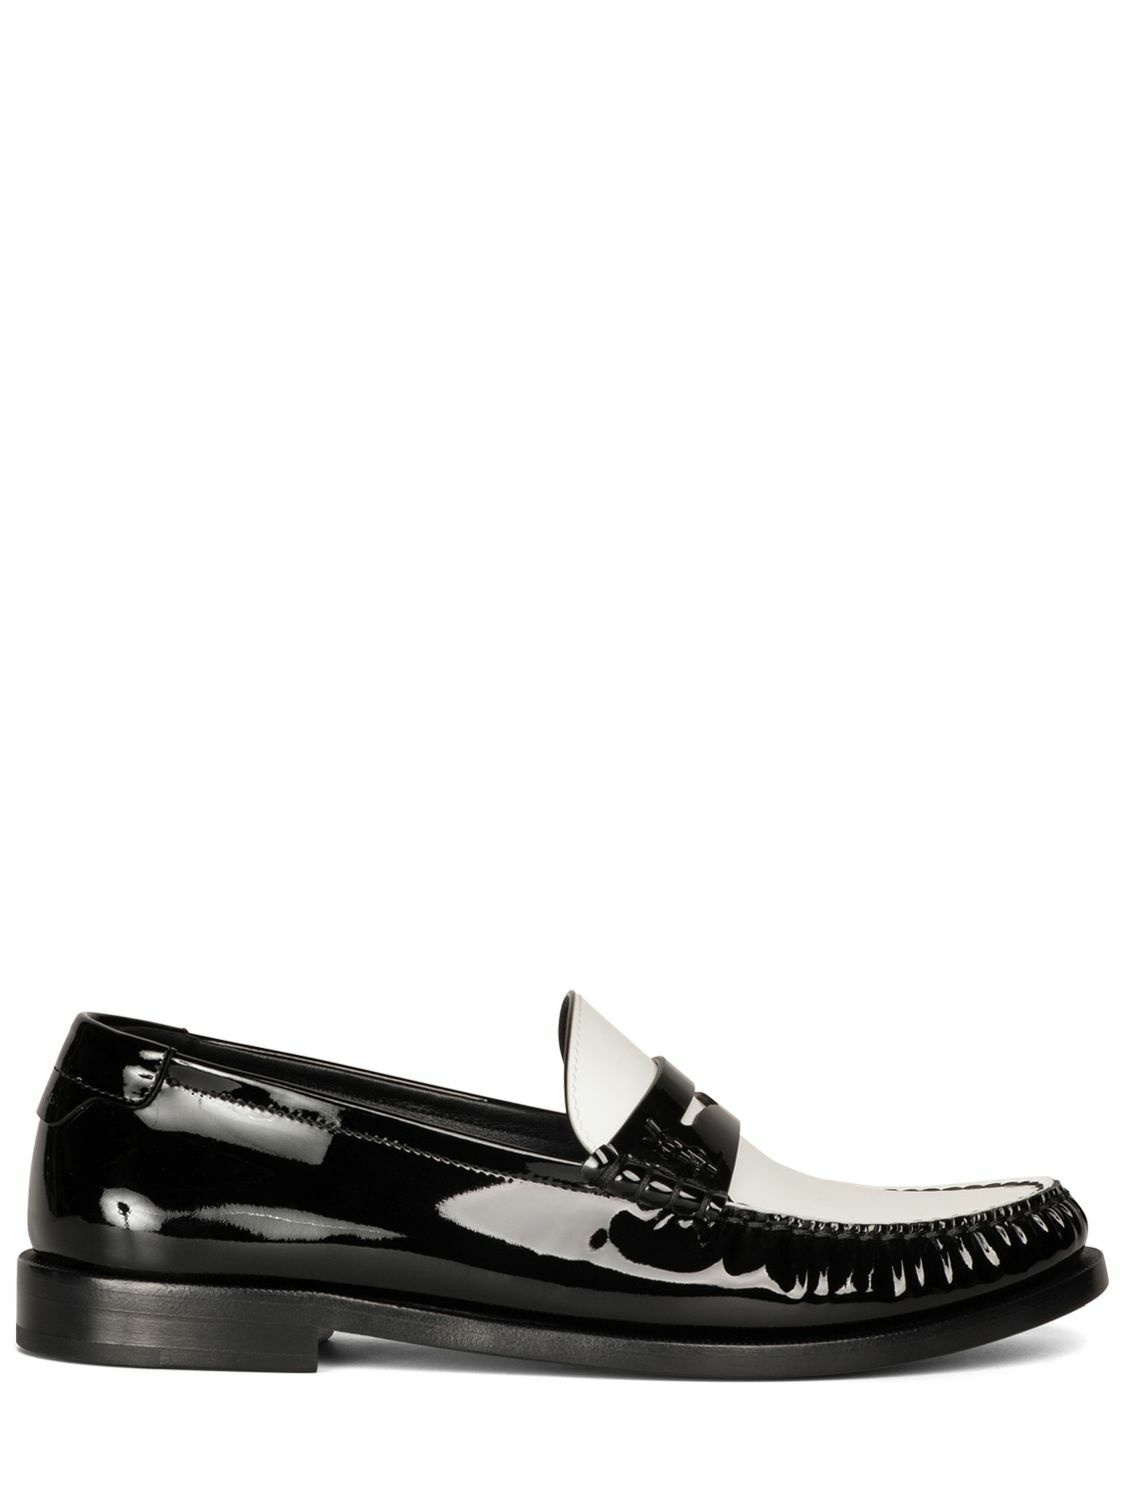 Photo: SAINT LAURENT - 15mm Le Loafer Leather Loafers